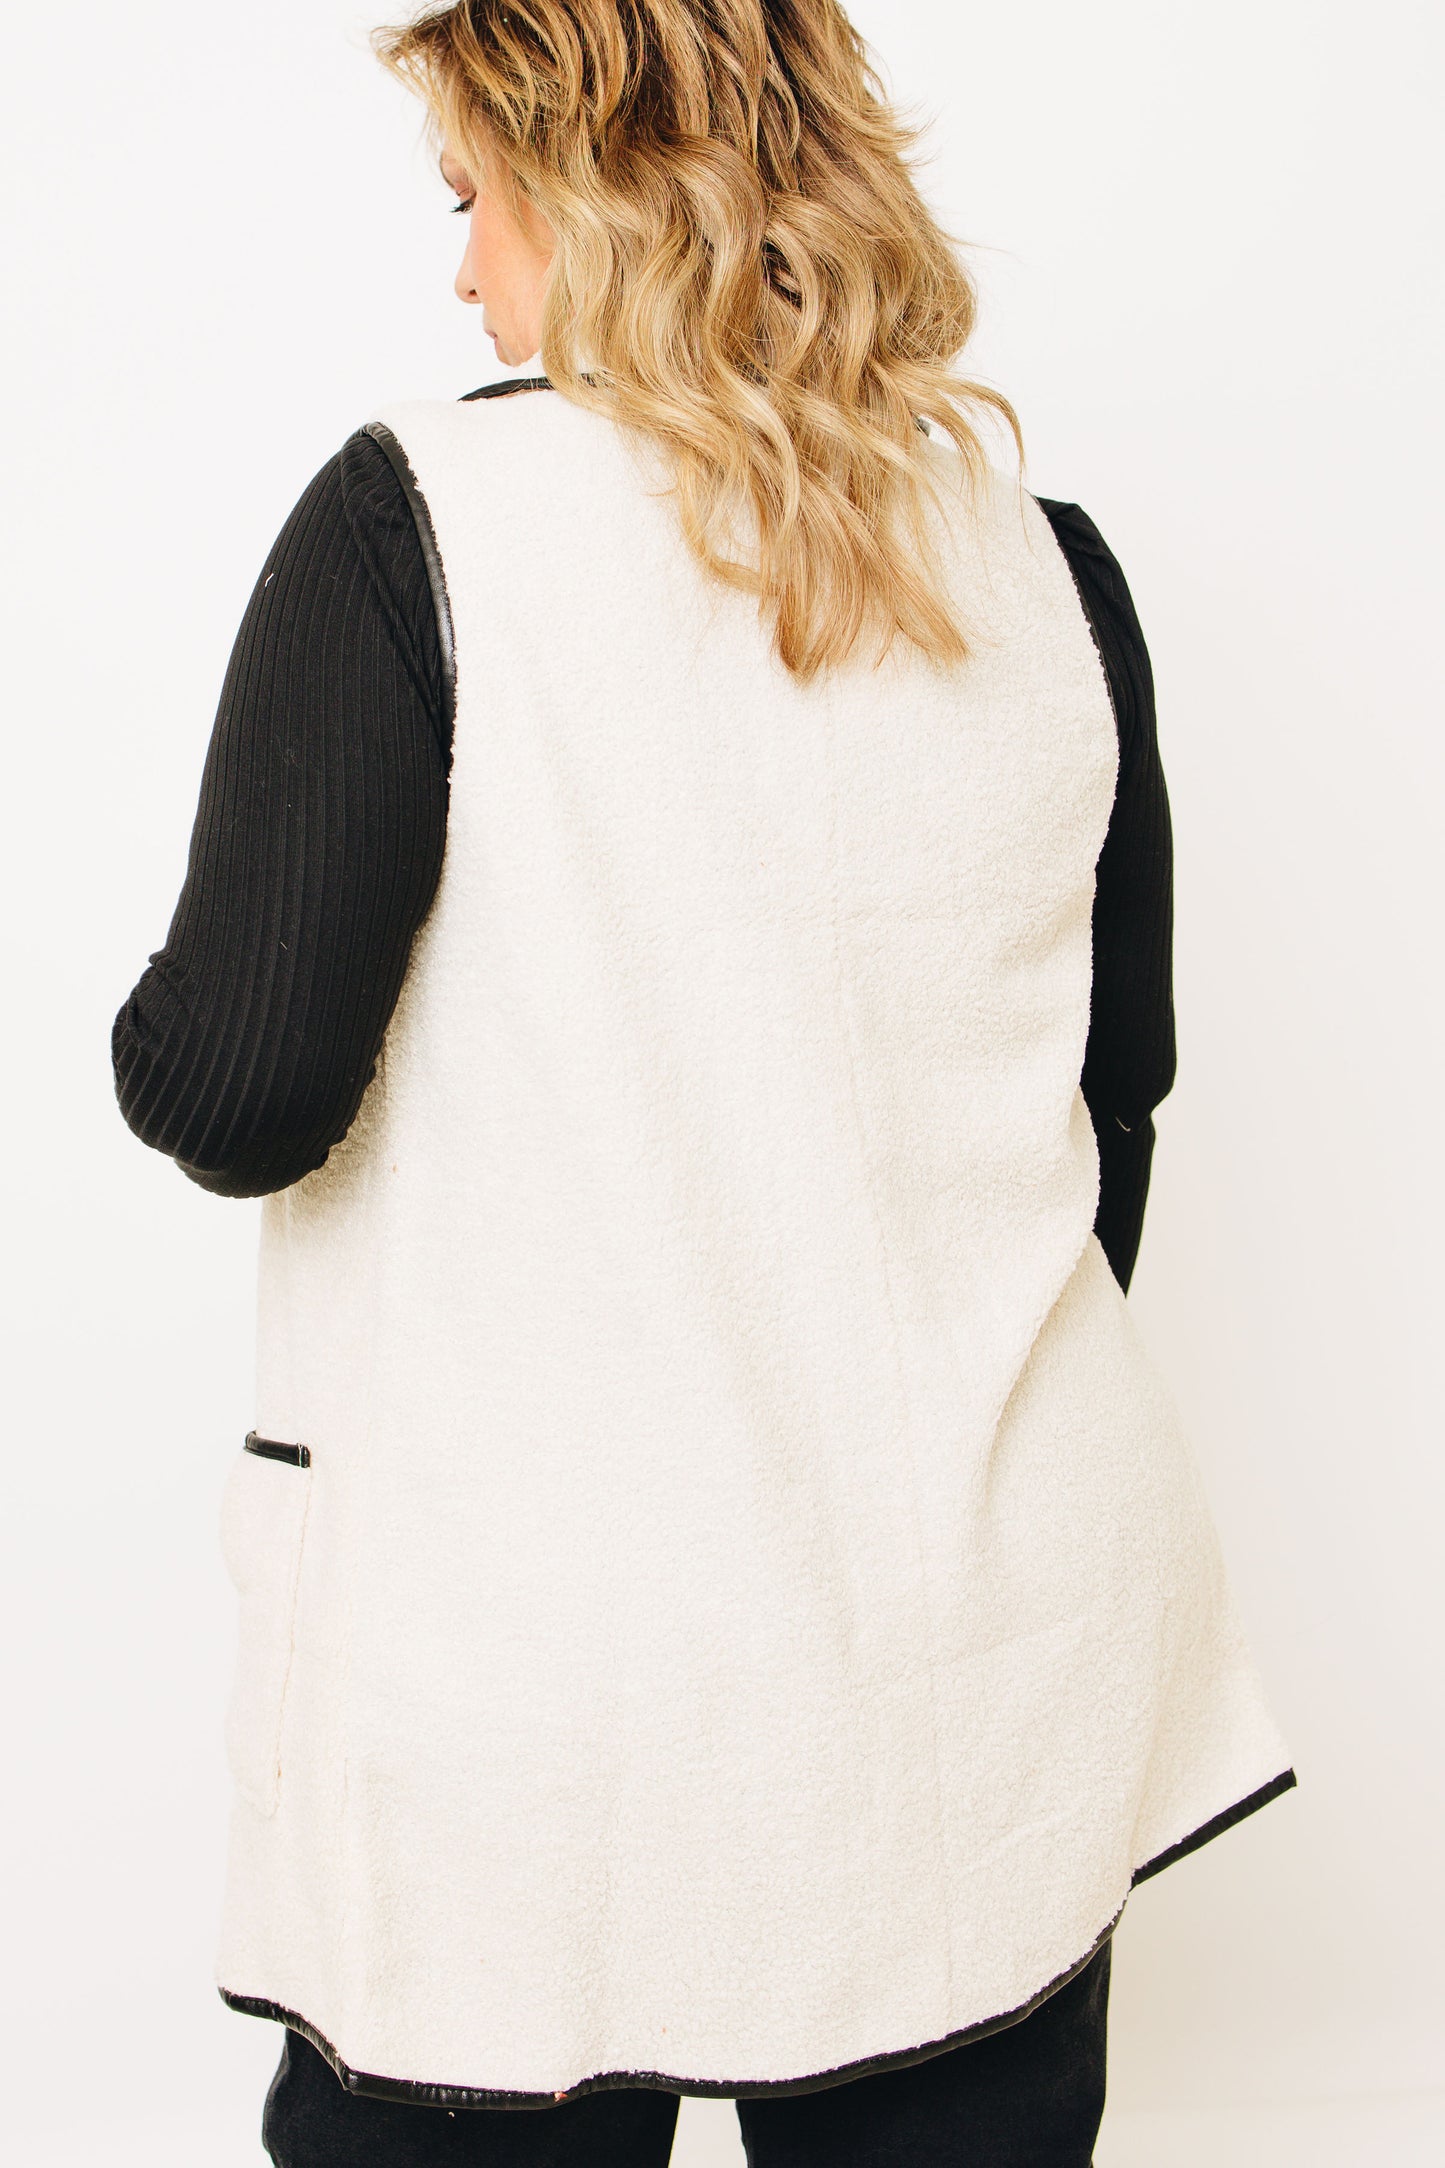 Fuzzed Up Long Collared Vest (S-L)